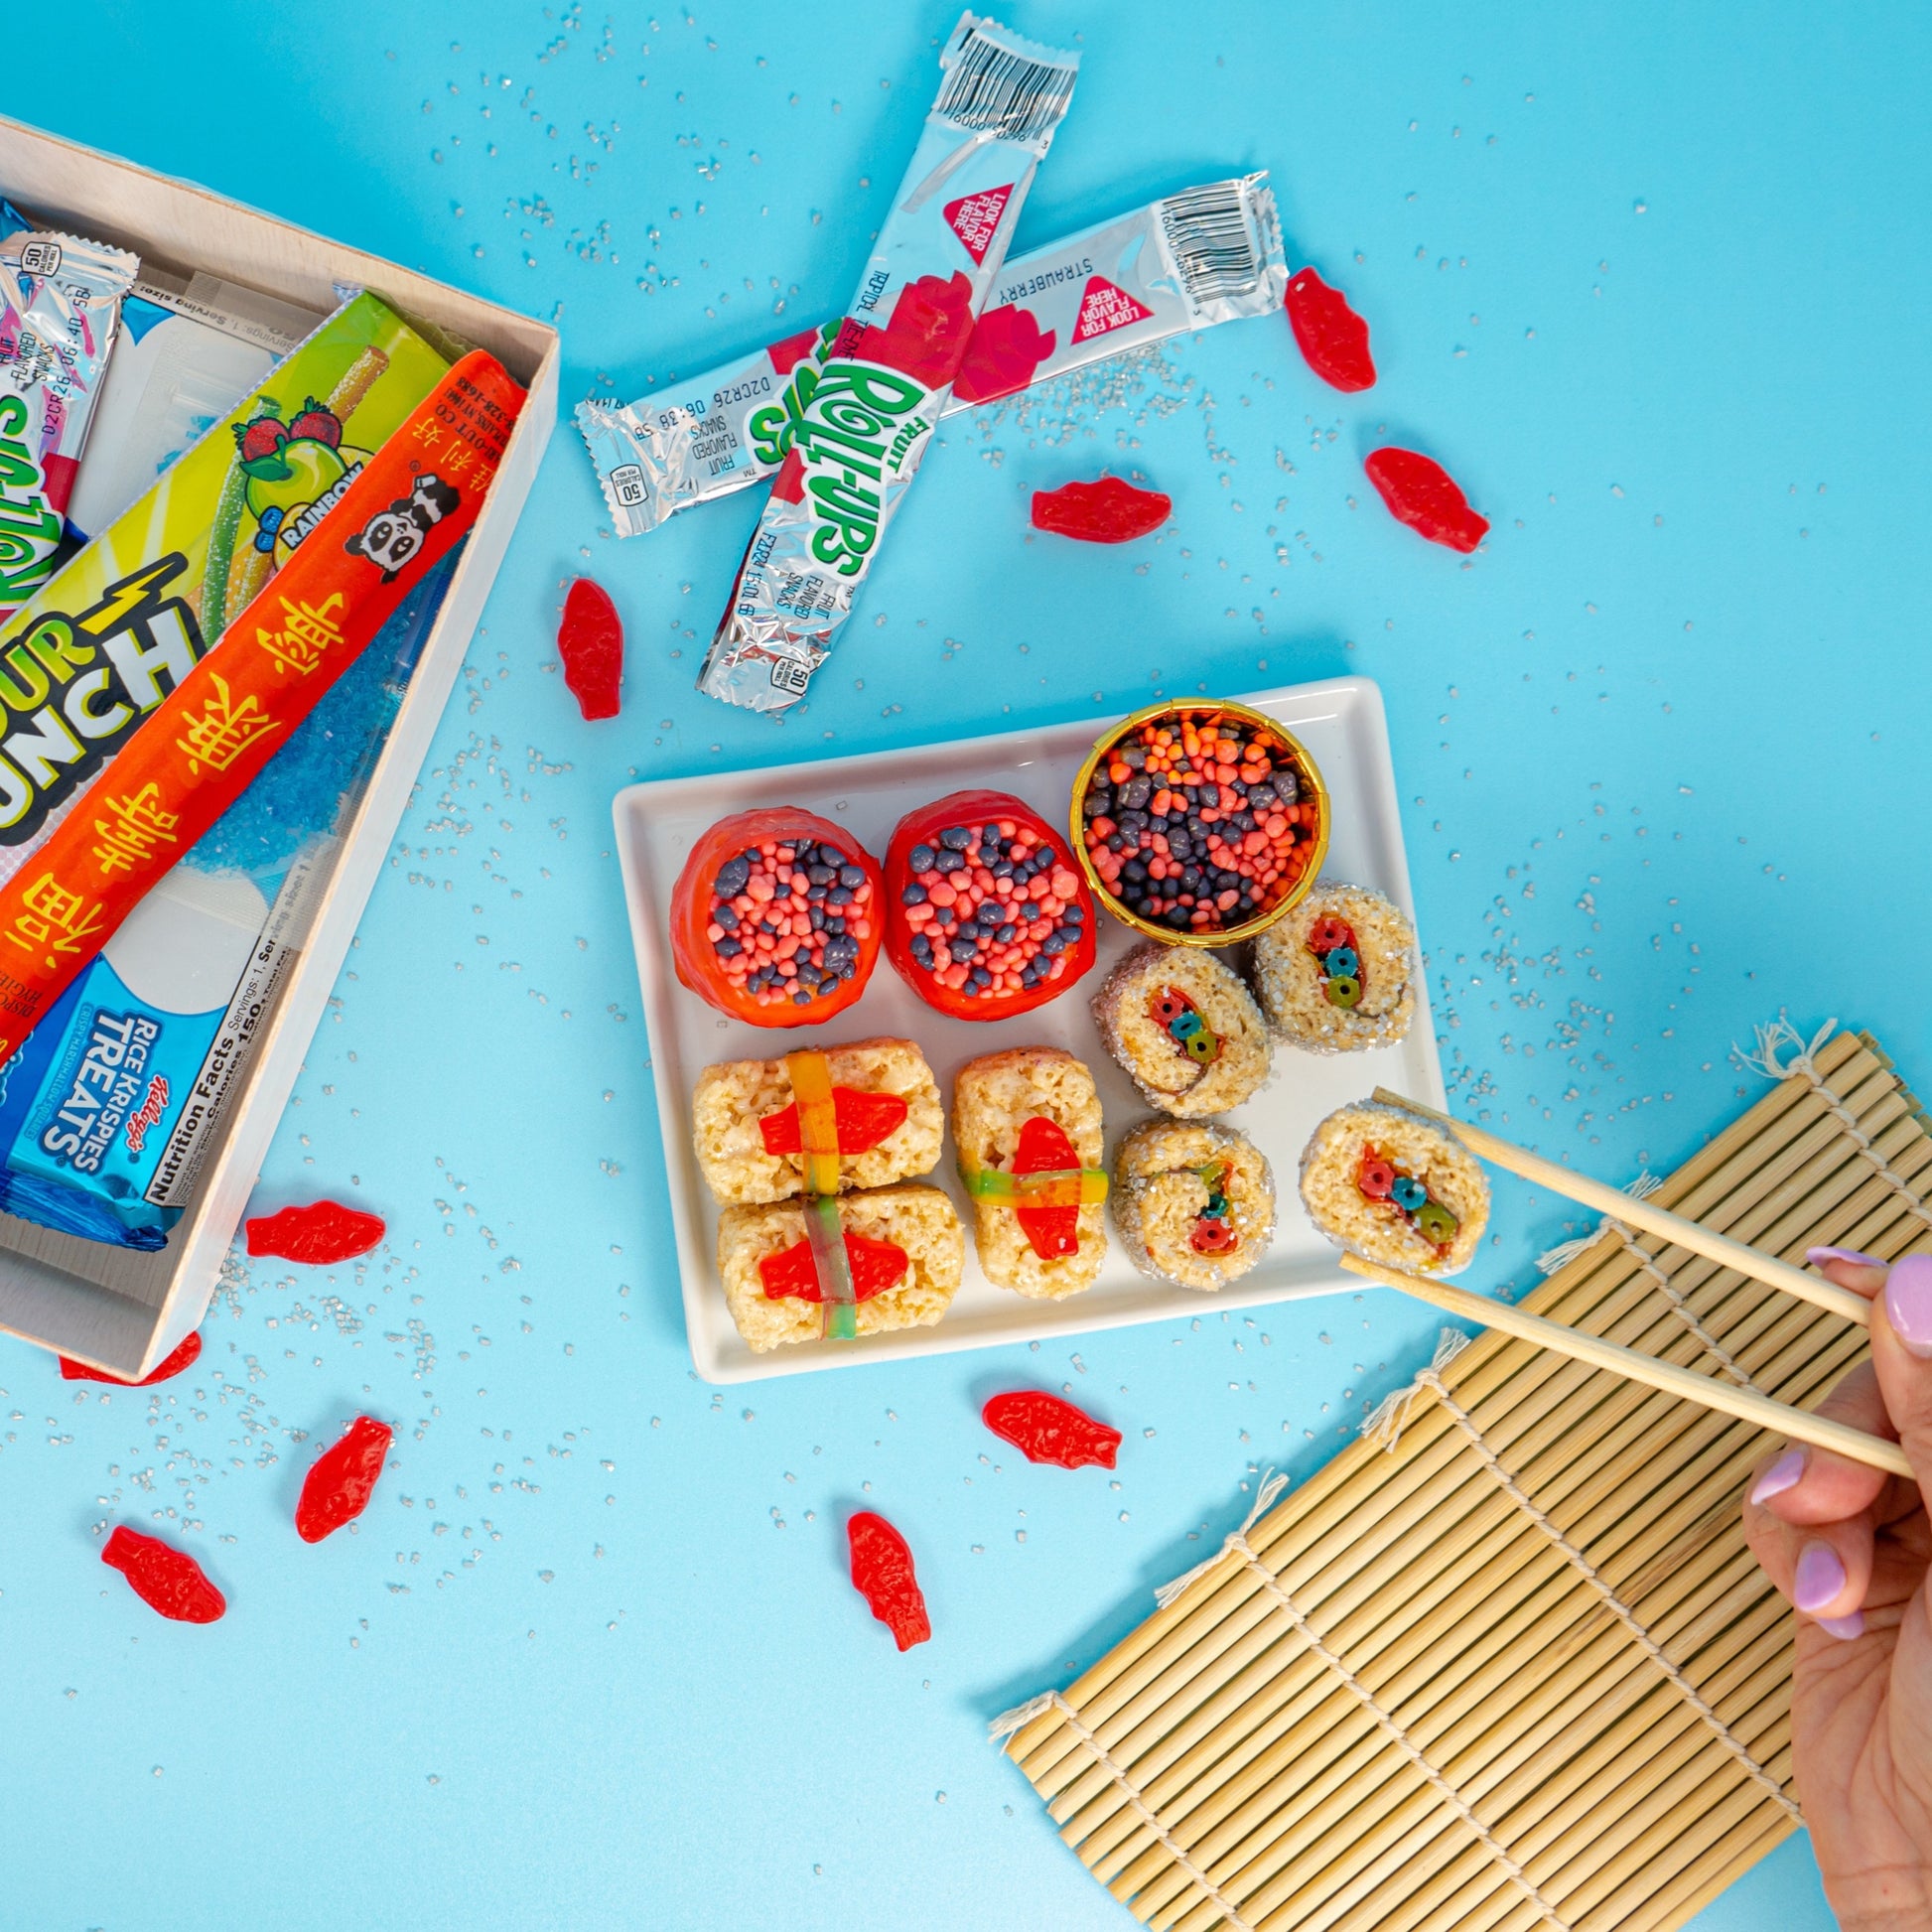 Make your Own Candy Sushi Kit, Food